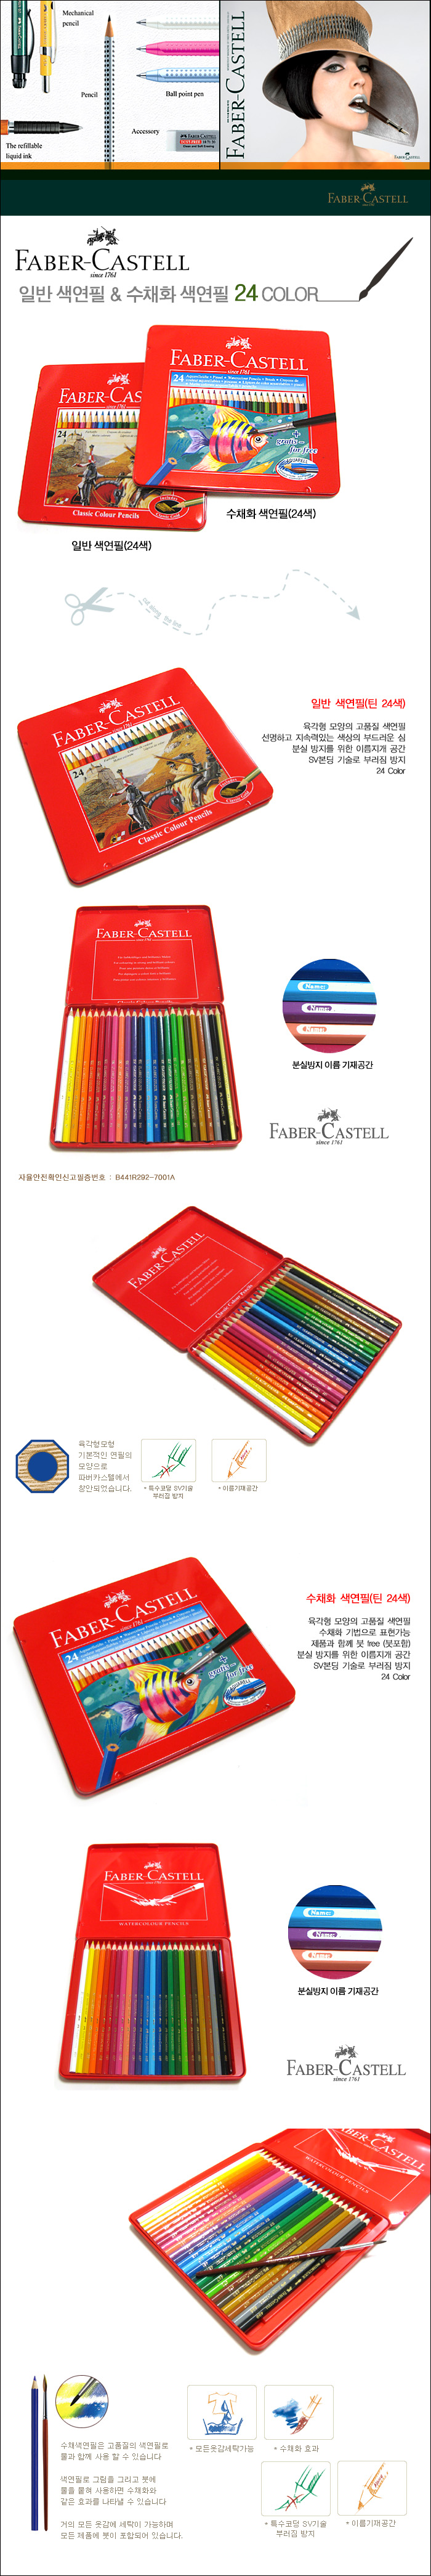 Genuine Faber-Castell / general drawing / Tin Case set of 24 color / watercolor drawing a set of 24 color / POP